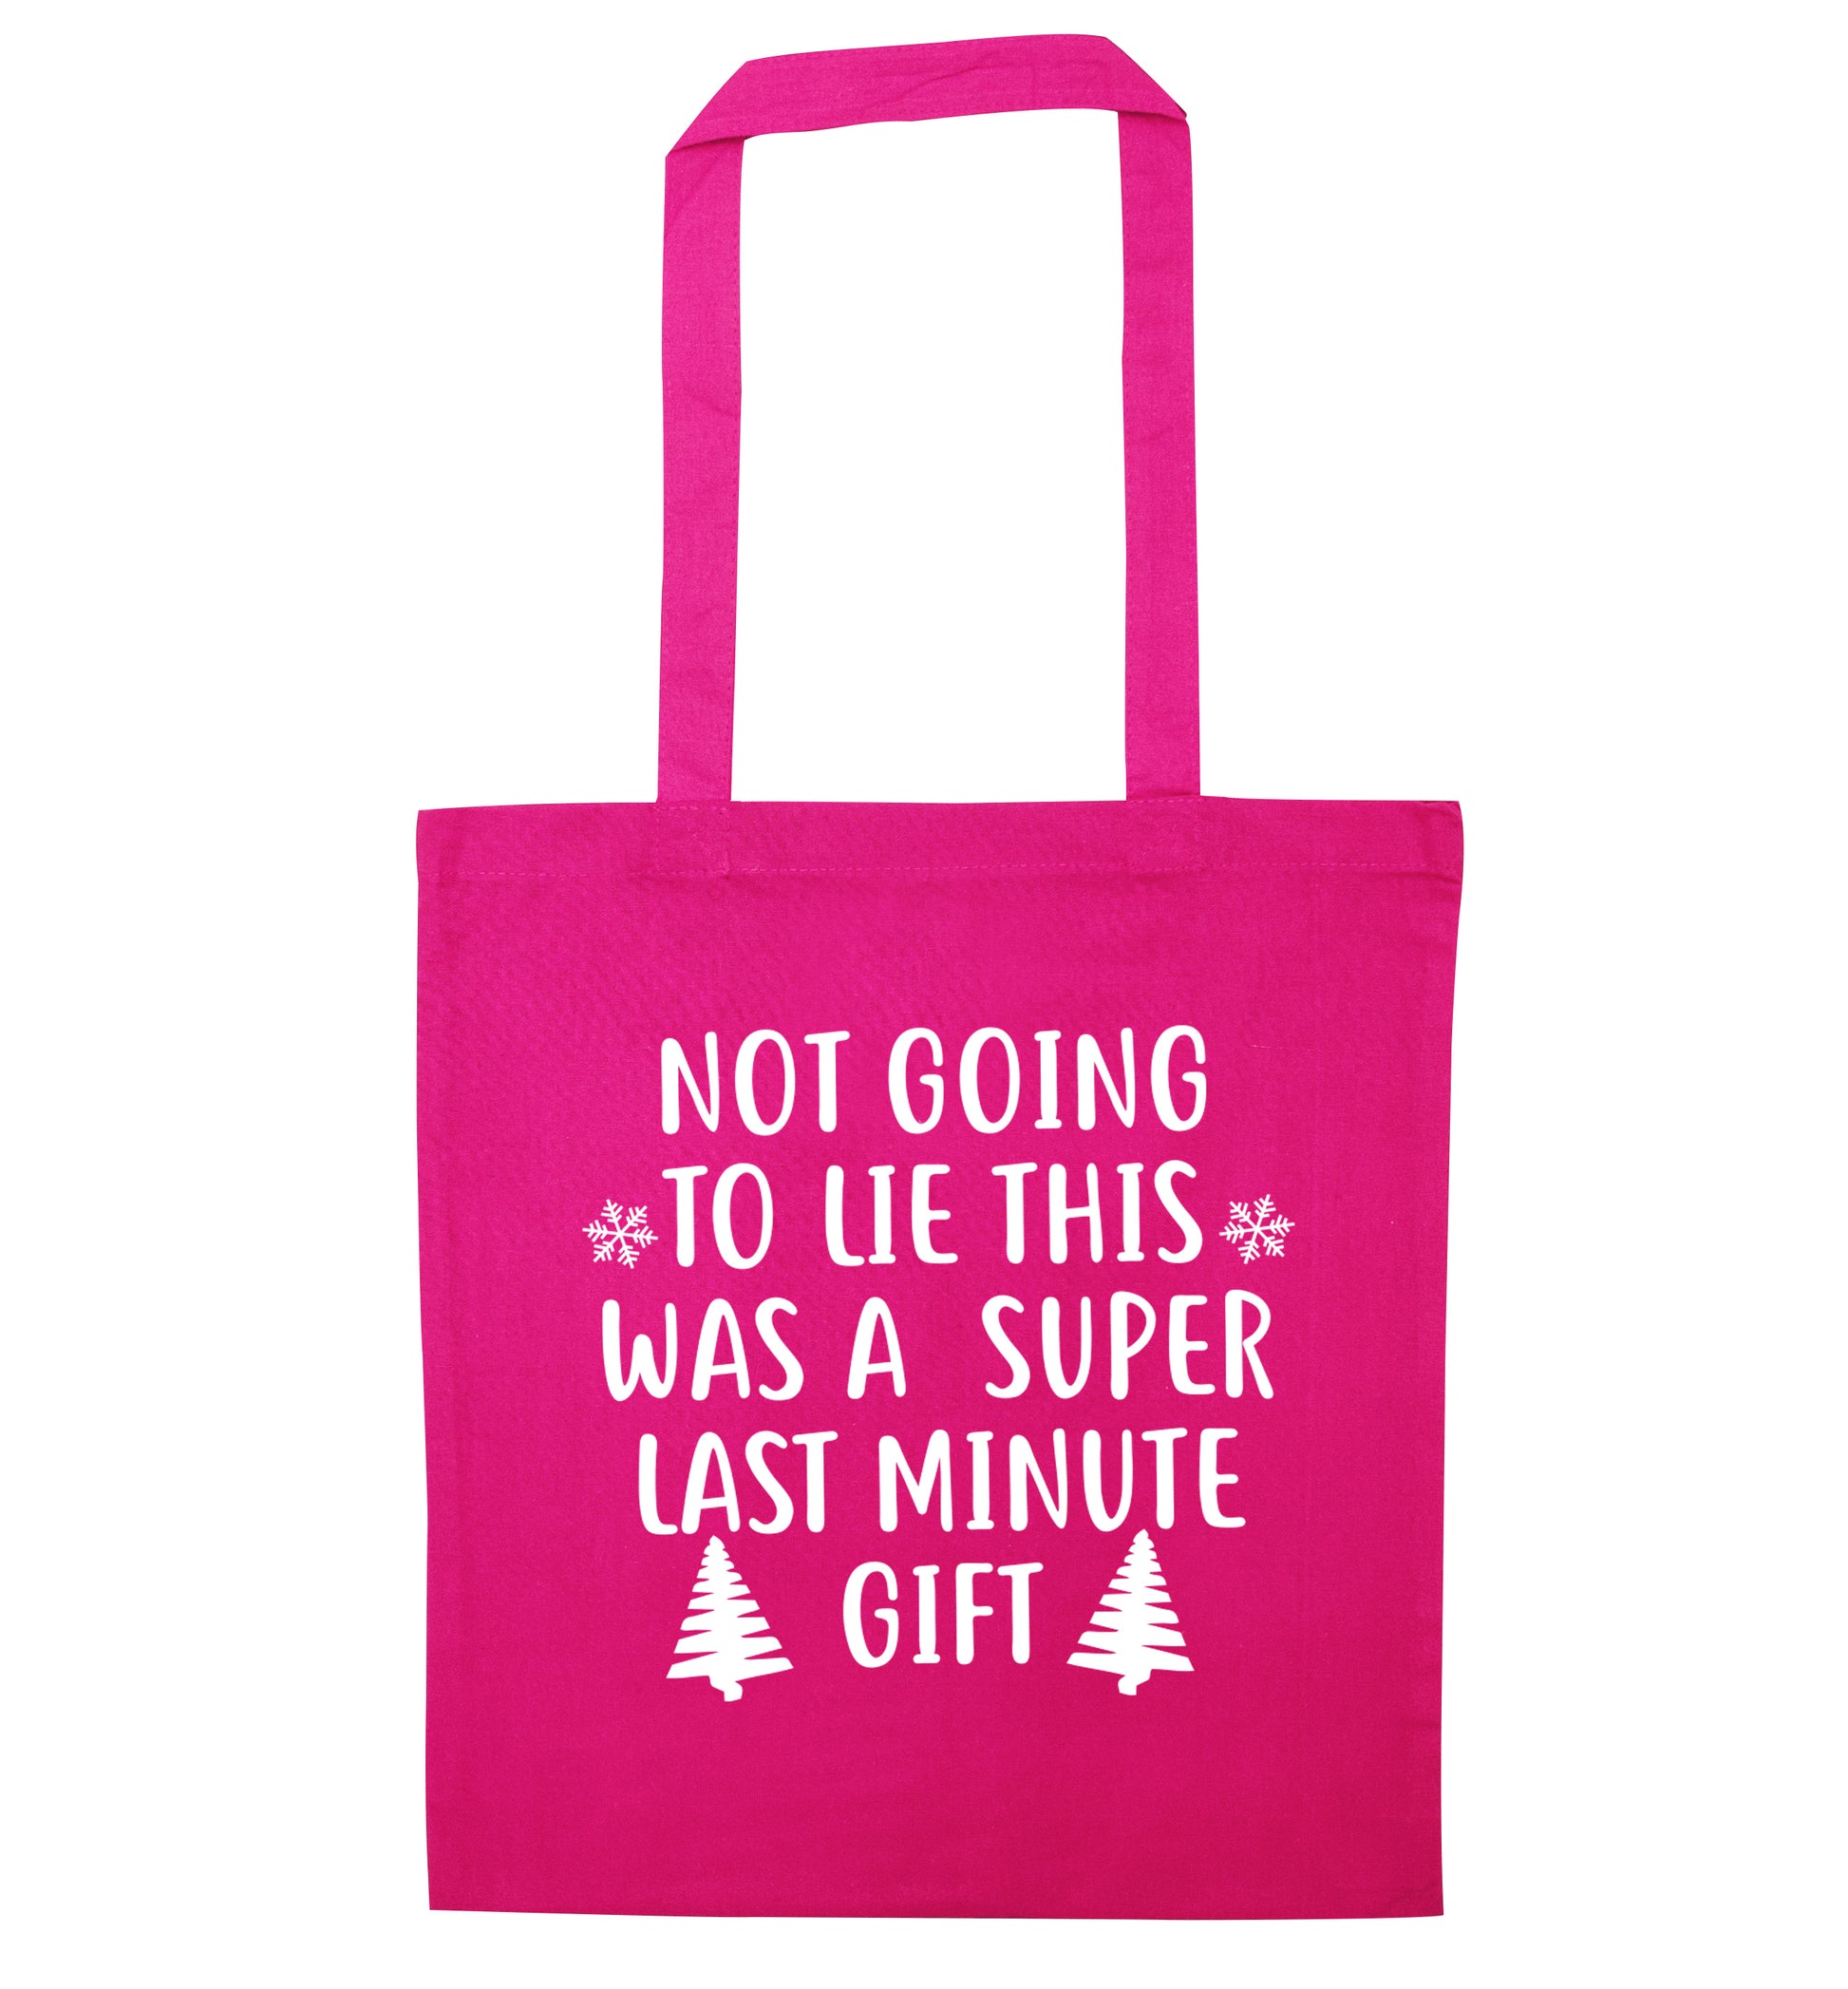 Not going to lie this was a super last minute gift pink tote bag